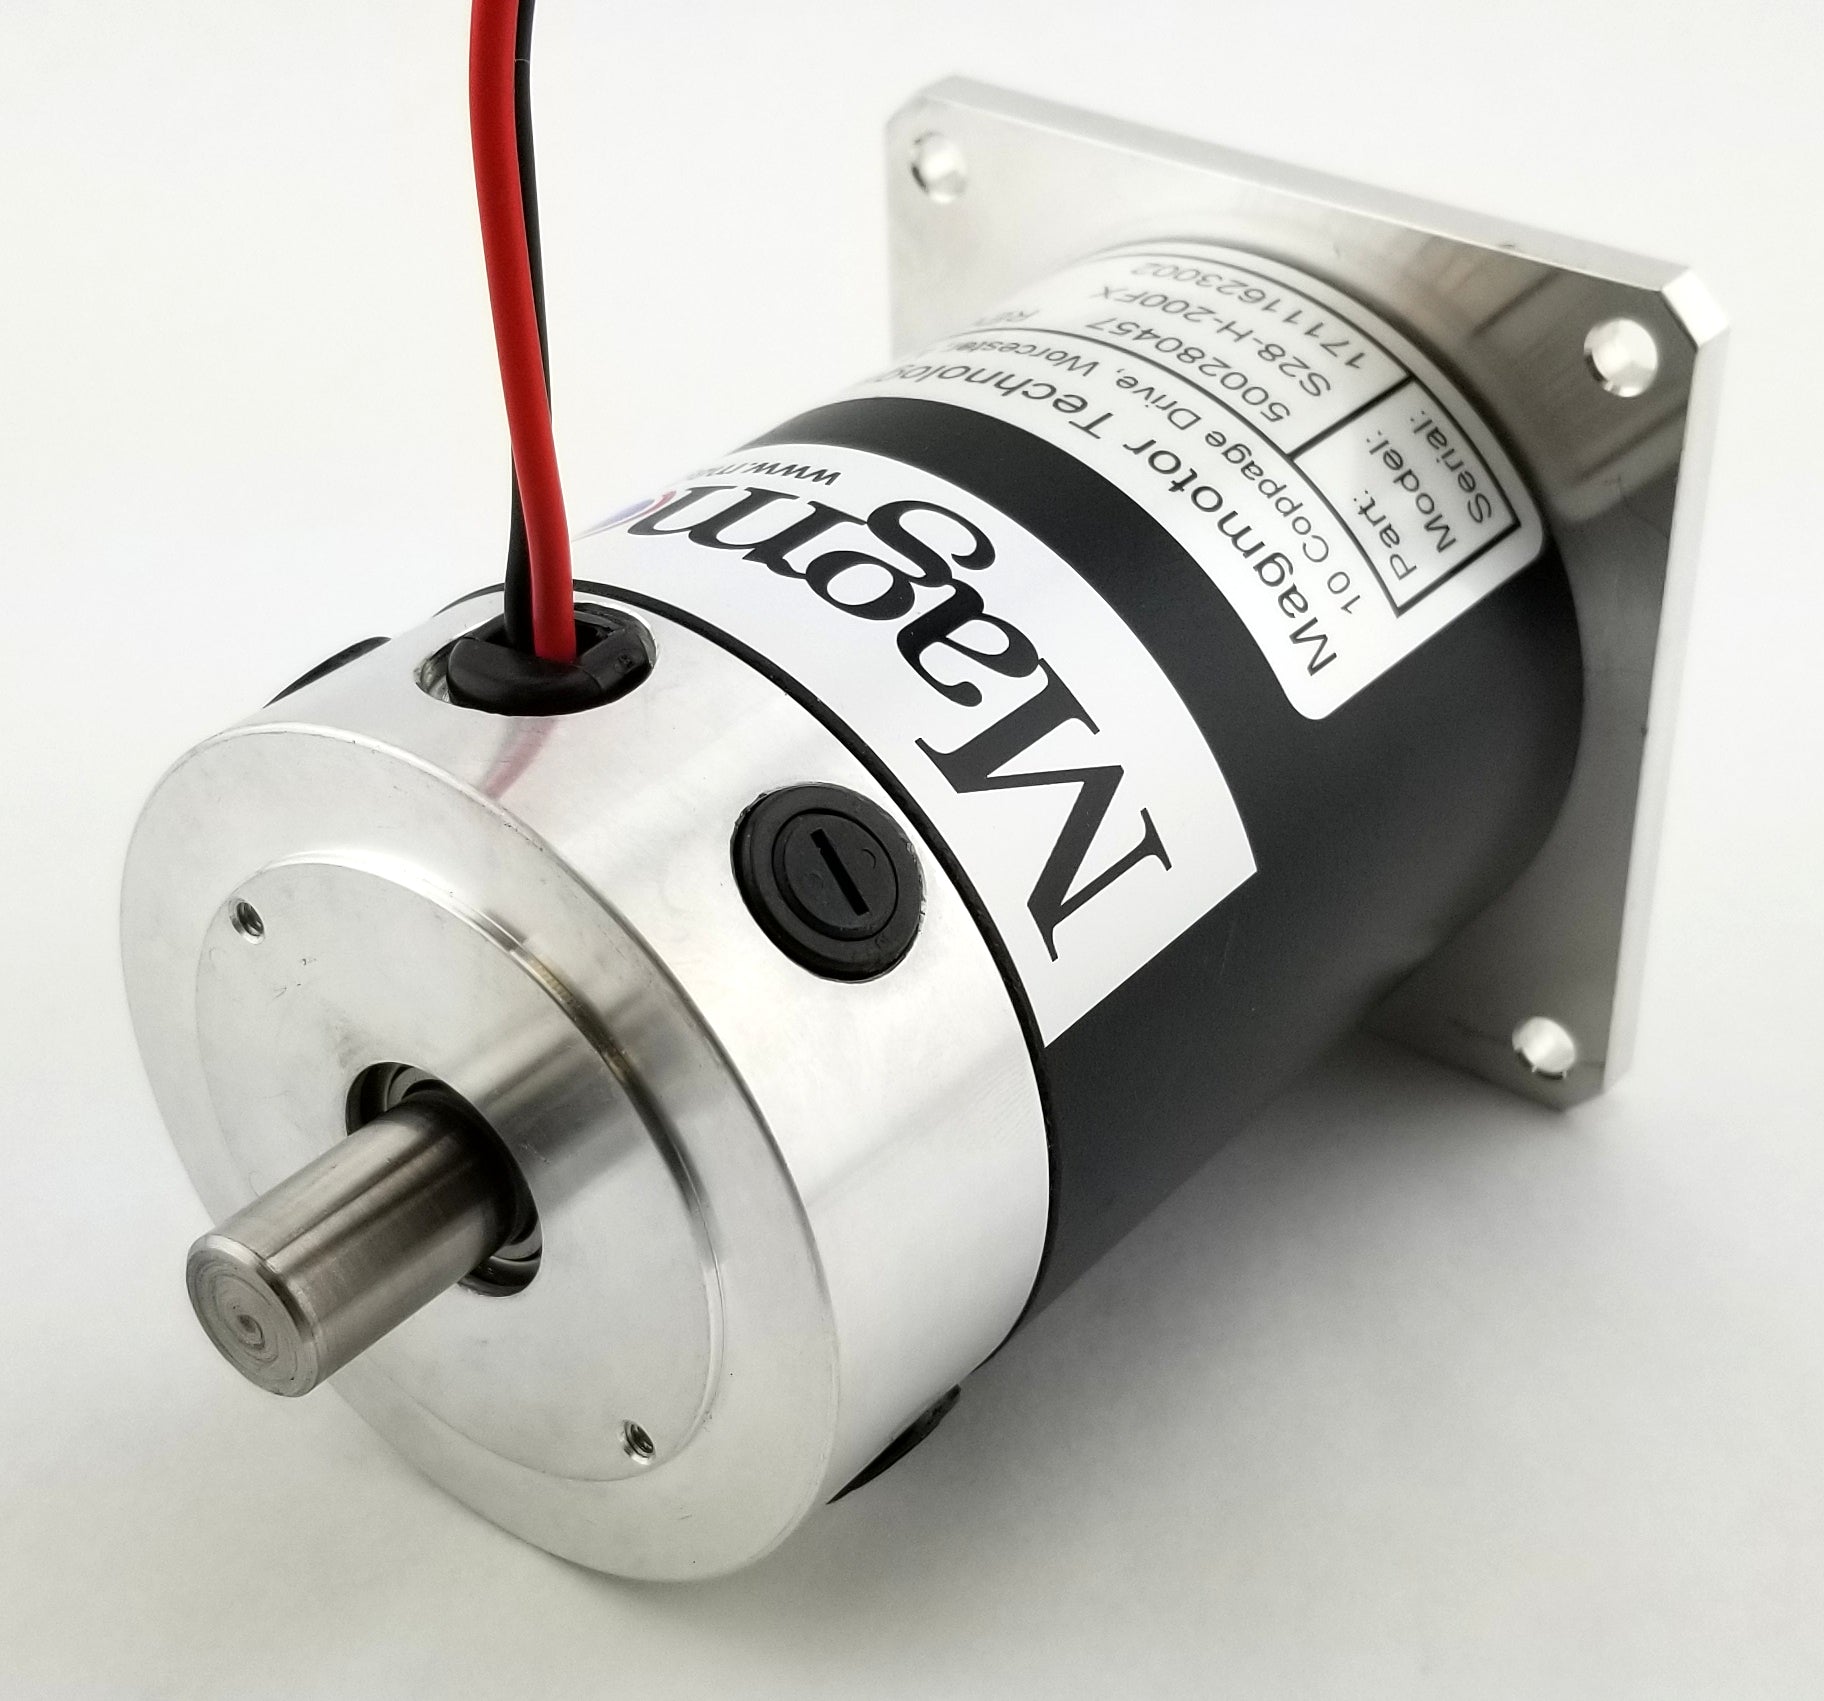 Magmotor S28-H-200FX 36 to 72 Volt 4 Pole Brushed Motor 500280457 Rear View